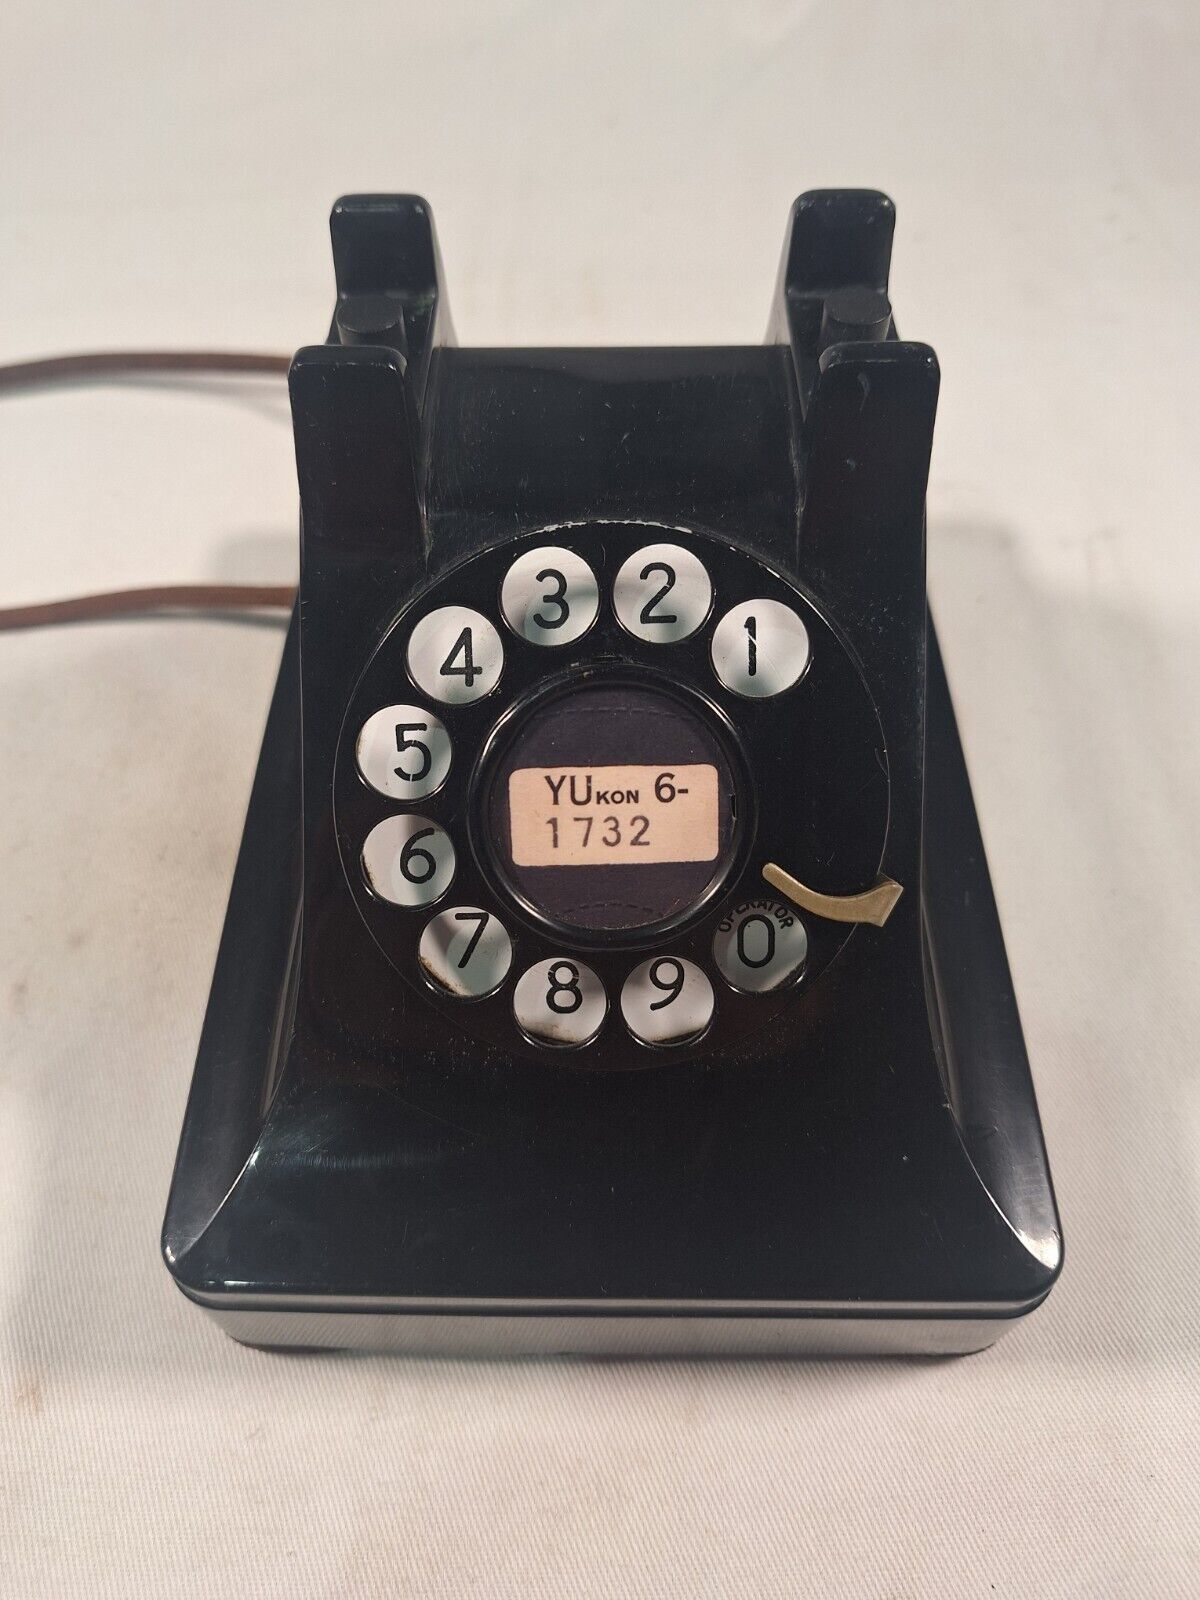 Western Electric 302 Rotary Dial Telephone  Restored Working